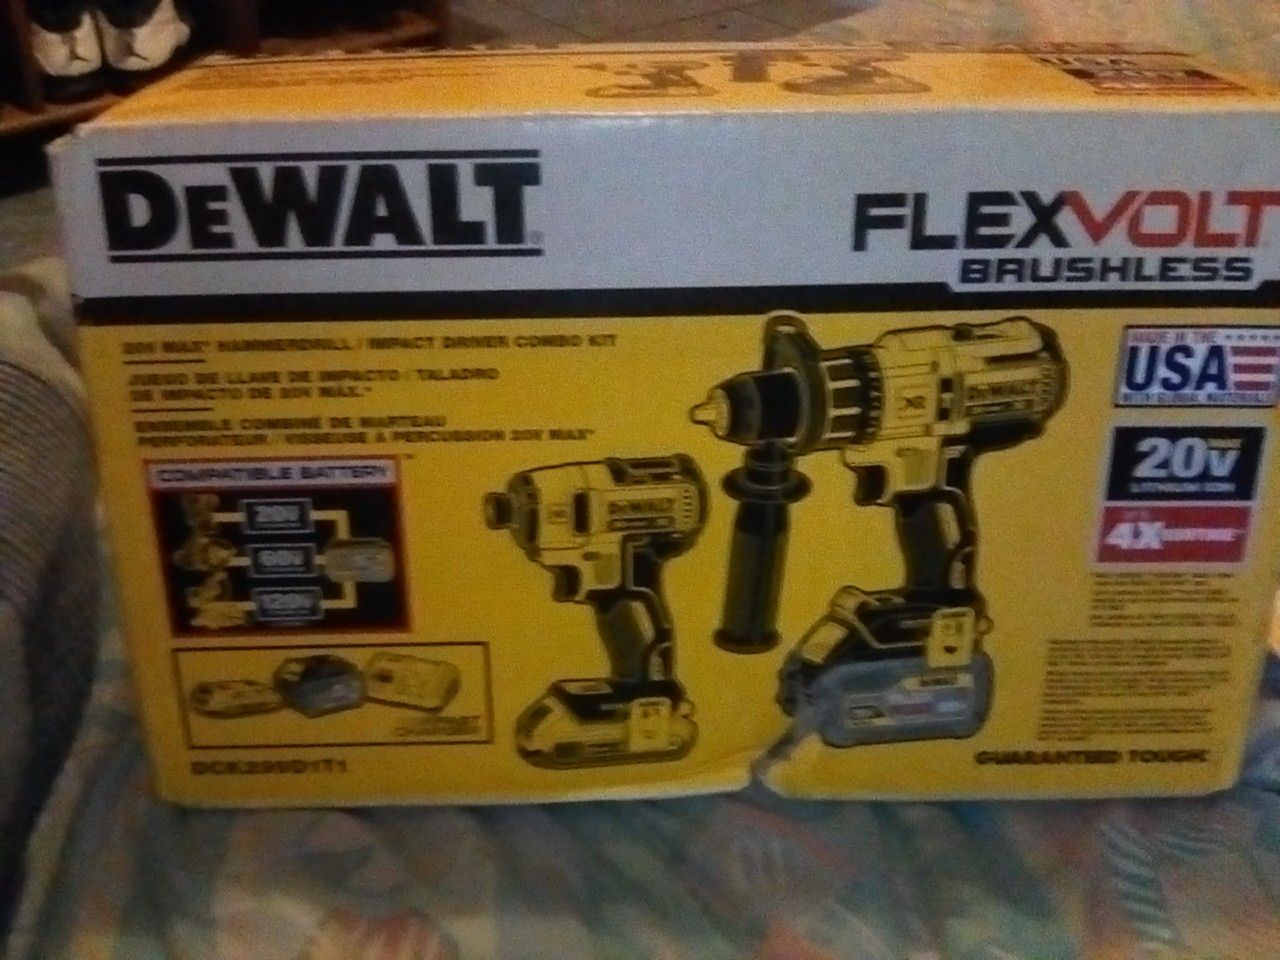 DeWALT FLEXVOLT BRUSHLESS 20V HAMMER DRILL/IMPACT DRIVER COMBO KIT WILLING TO TRADE FOR IPHONE XS MAX IF NOT CASH